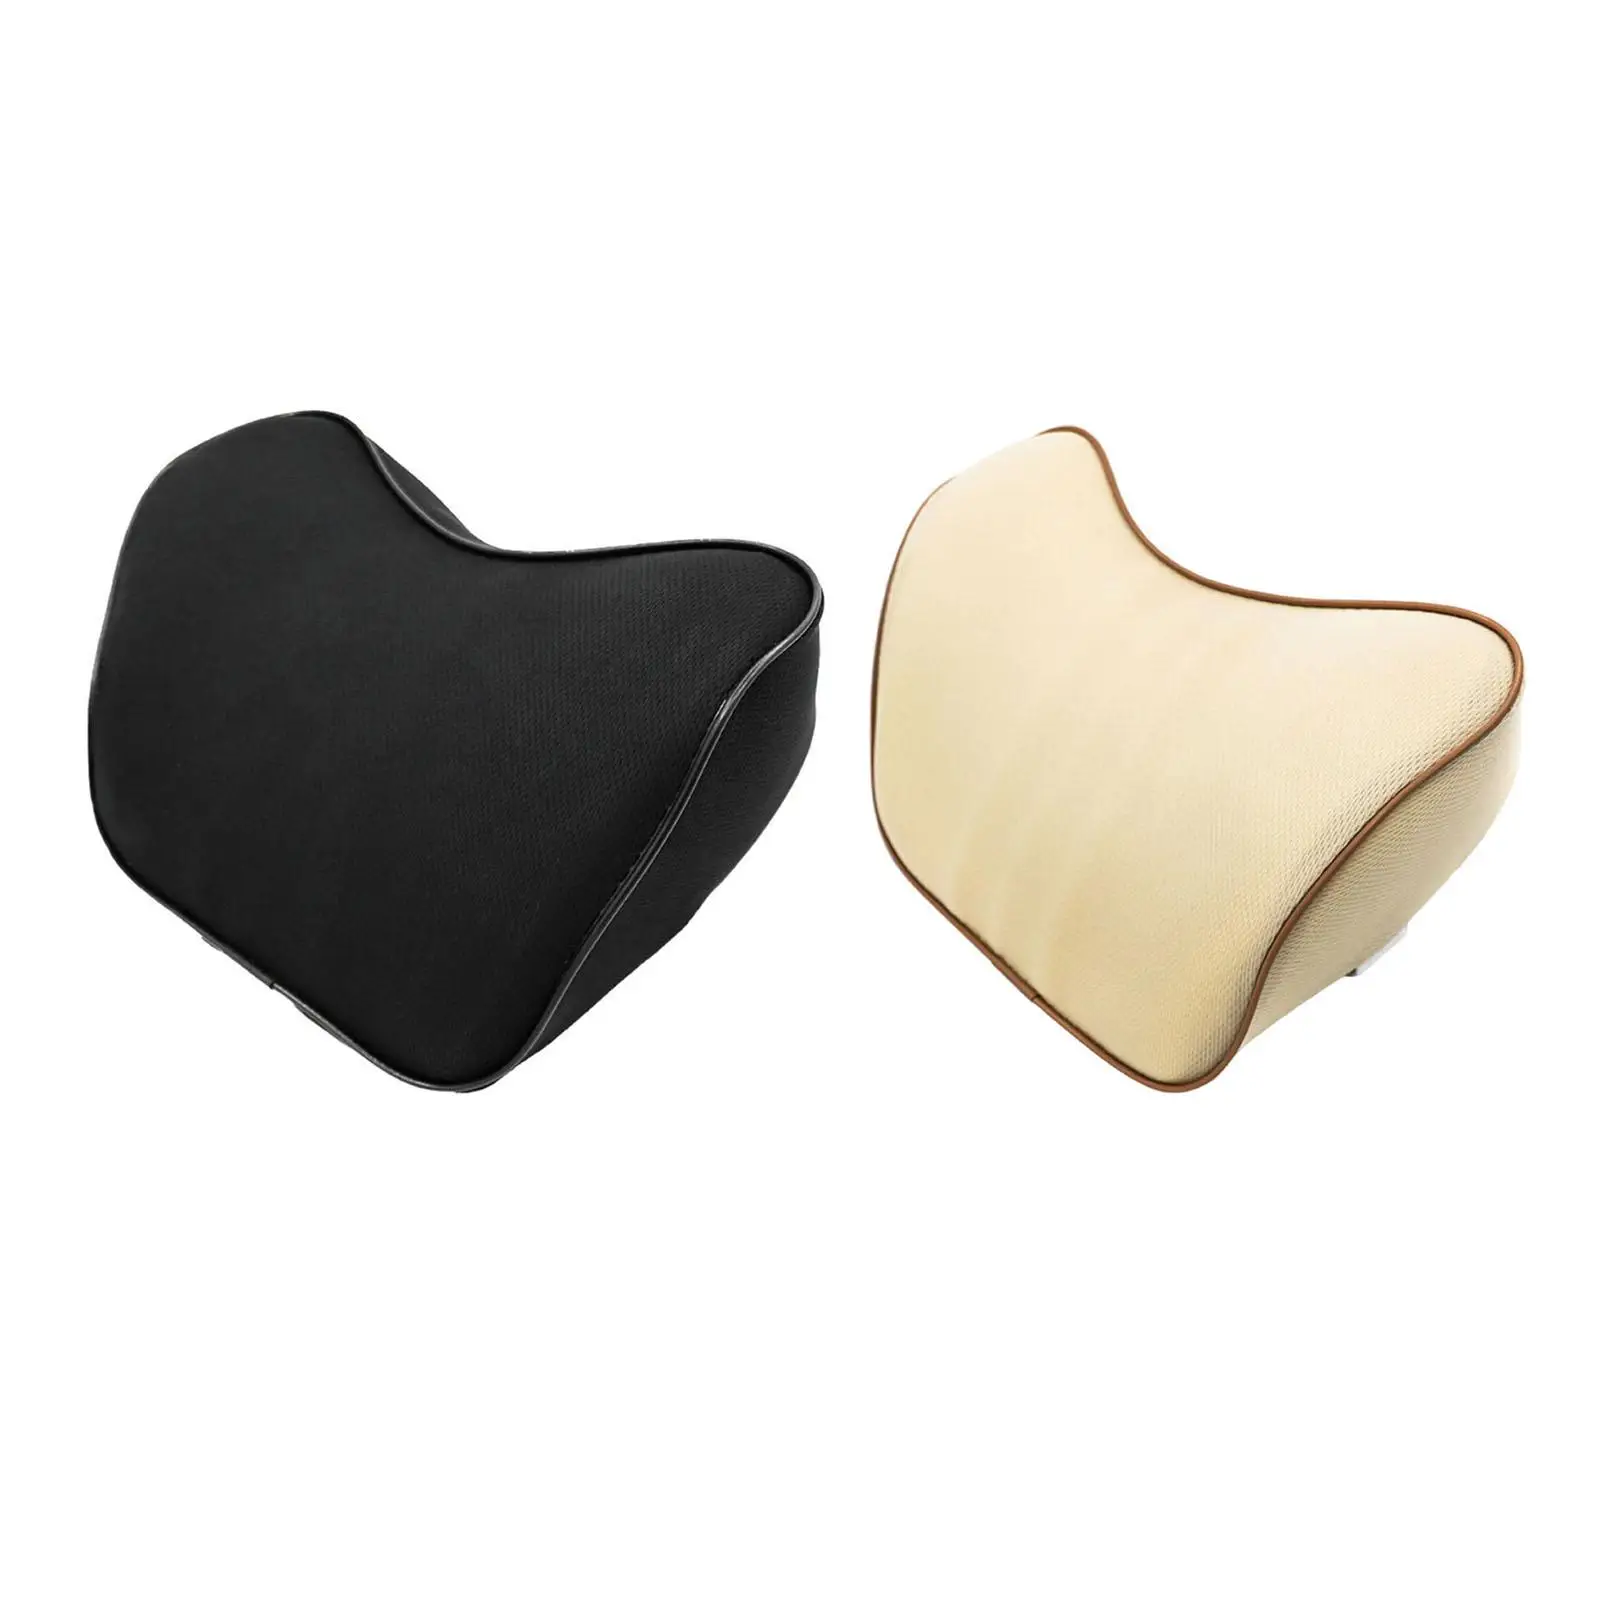 Car Neck Cushion Car Seat Headrest for Neck Back Pain Relief Lumbar Support Soft Breathable Seat Headrest Pad